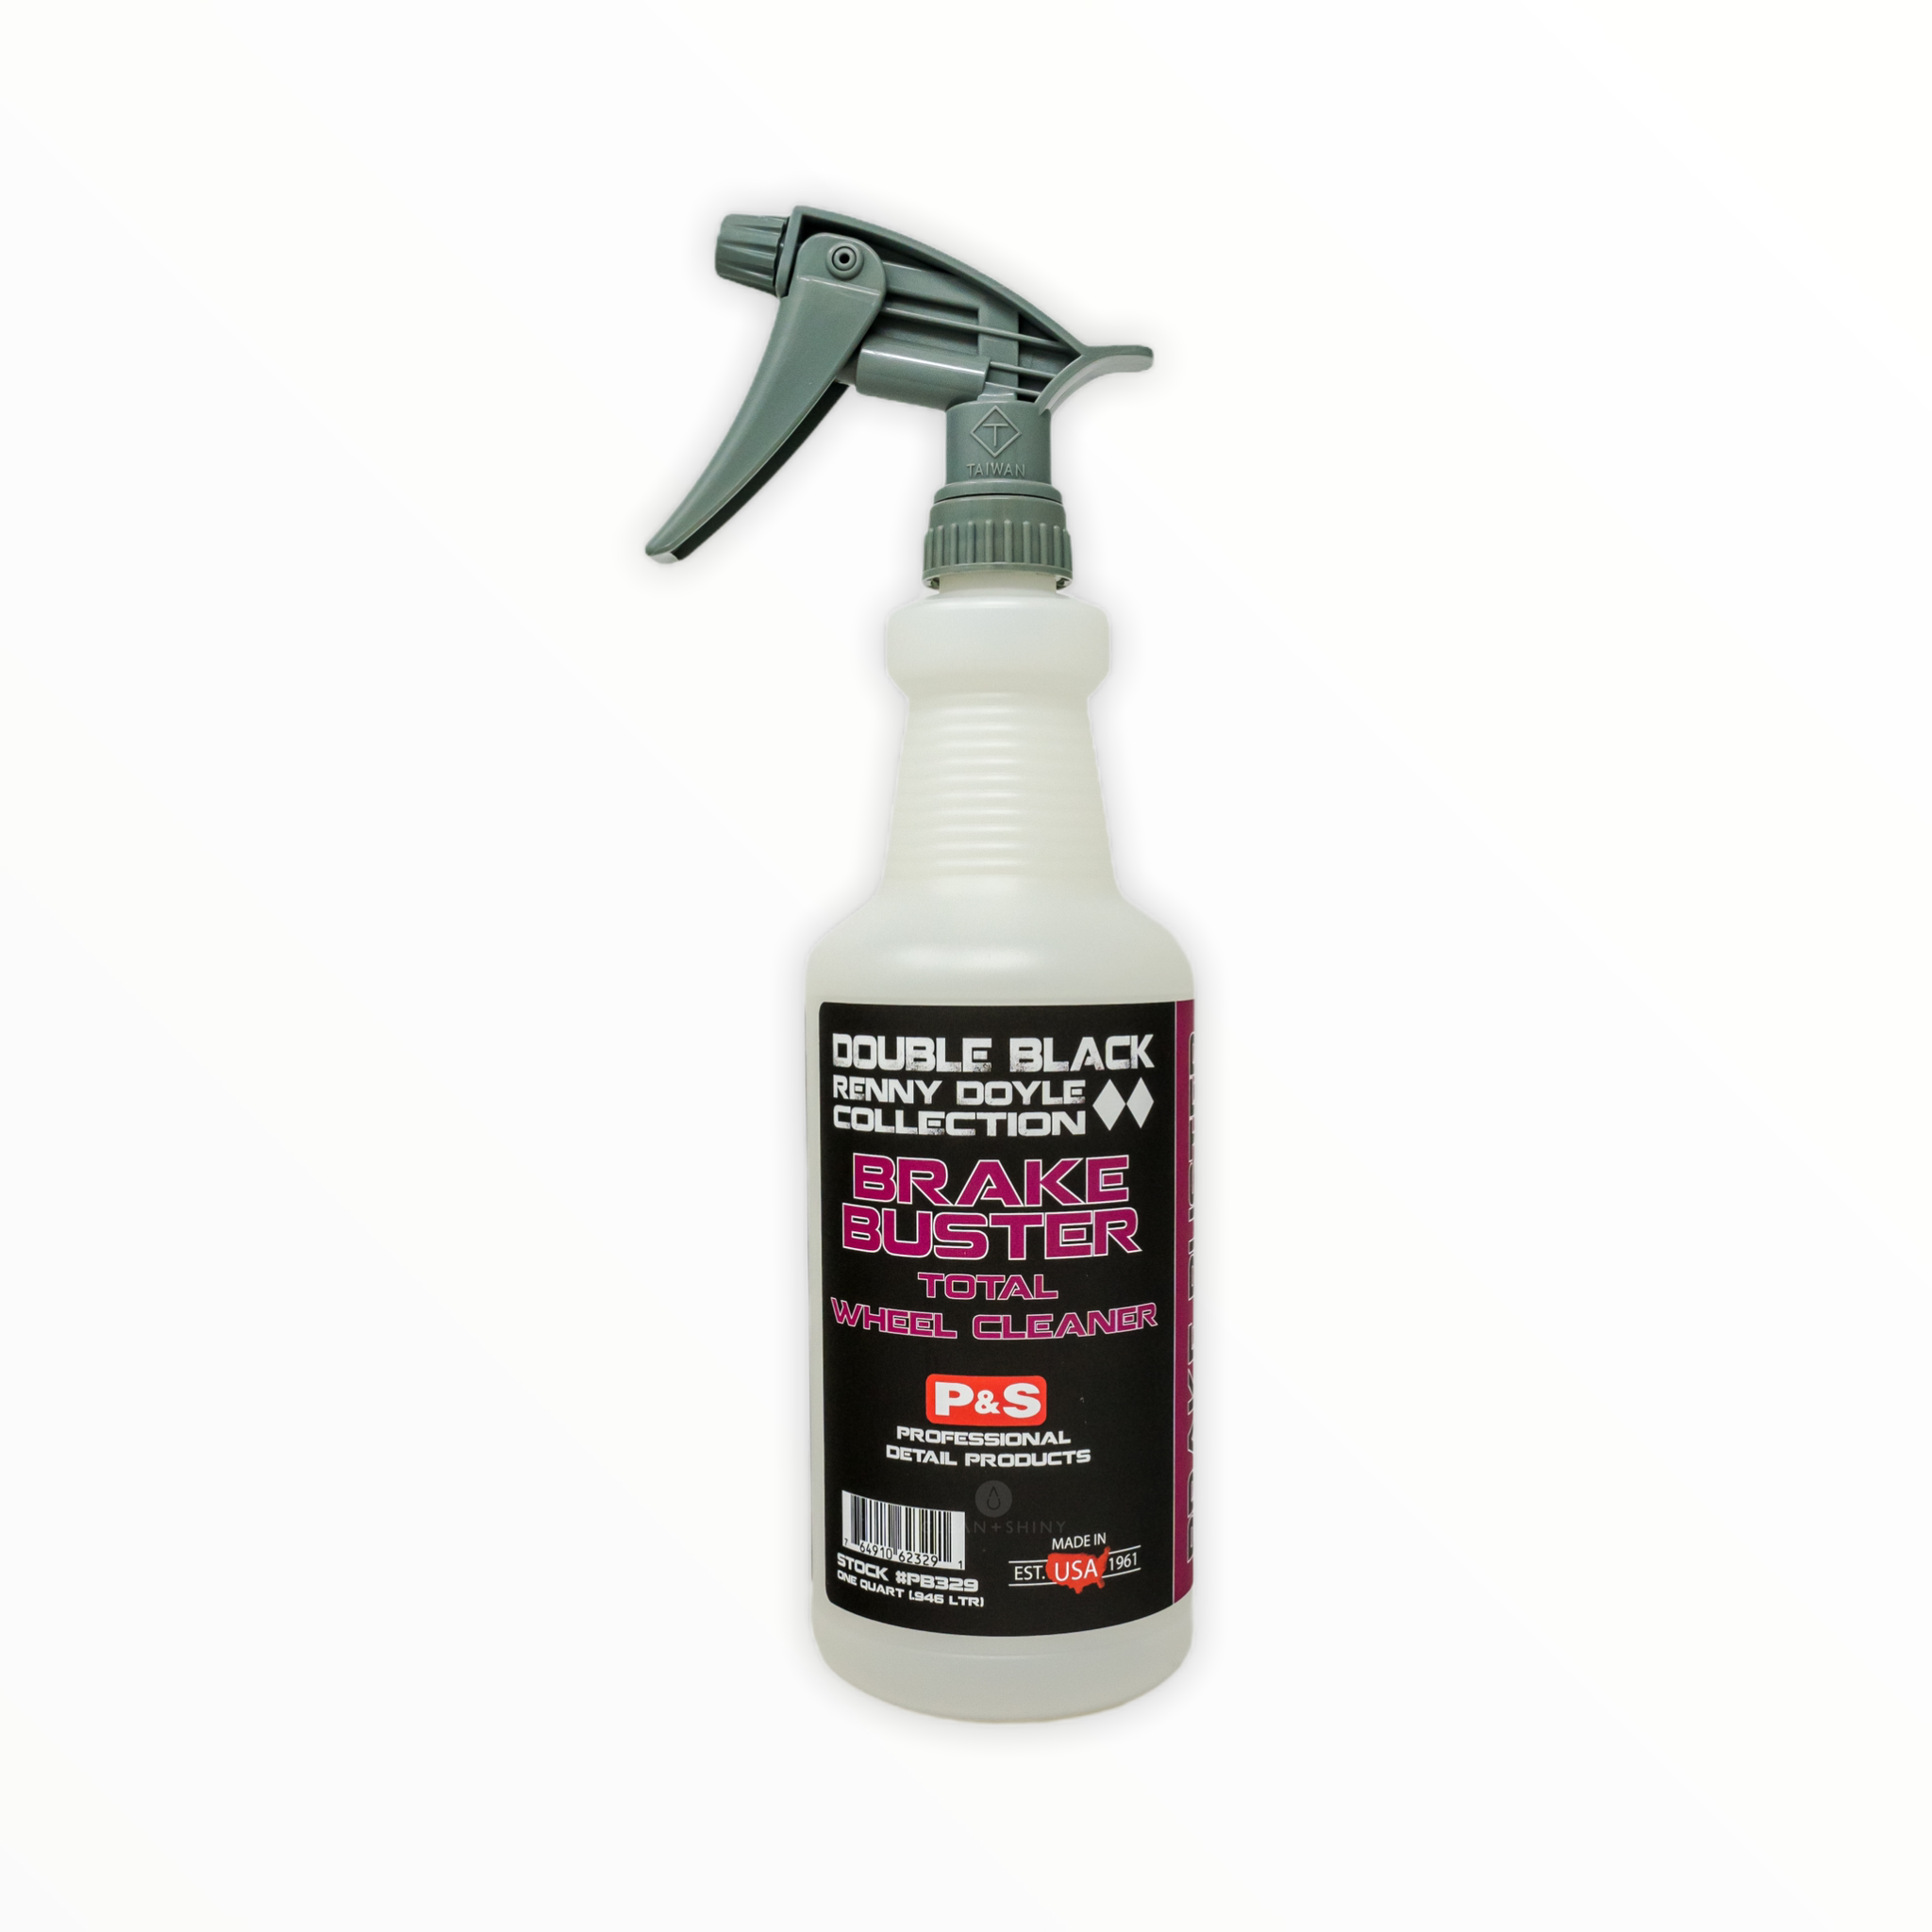 P&S Brake Buster Wheel Cleaner by Renny Doyle